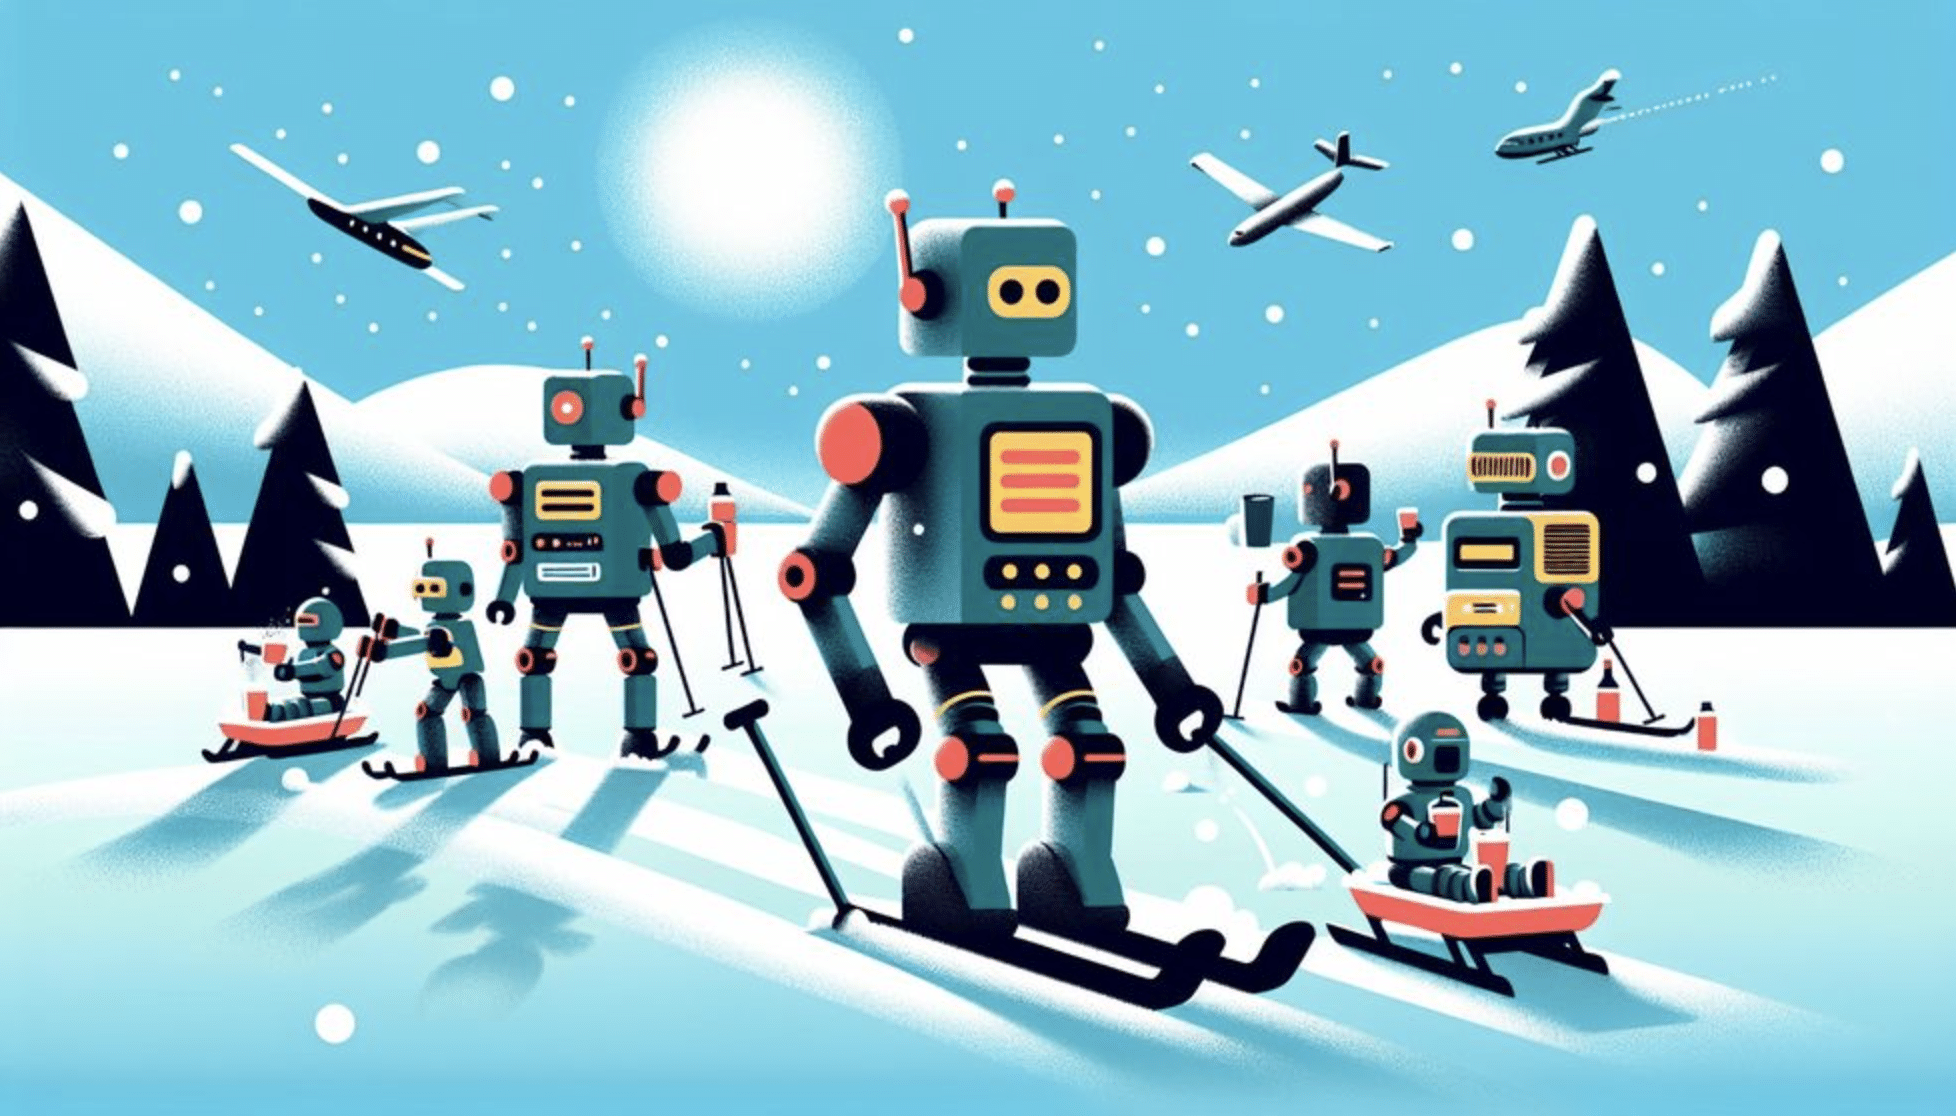 Can Artificial Intelligences Take a Christmas Break?